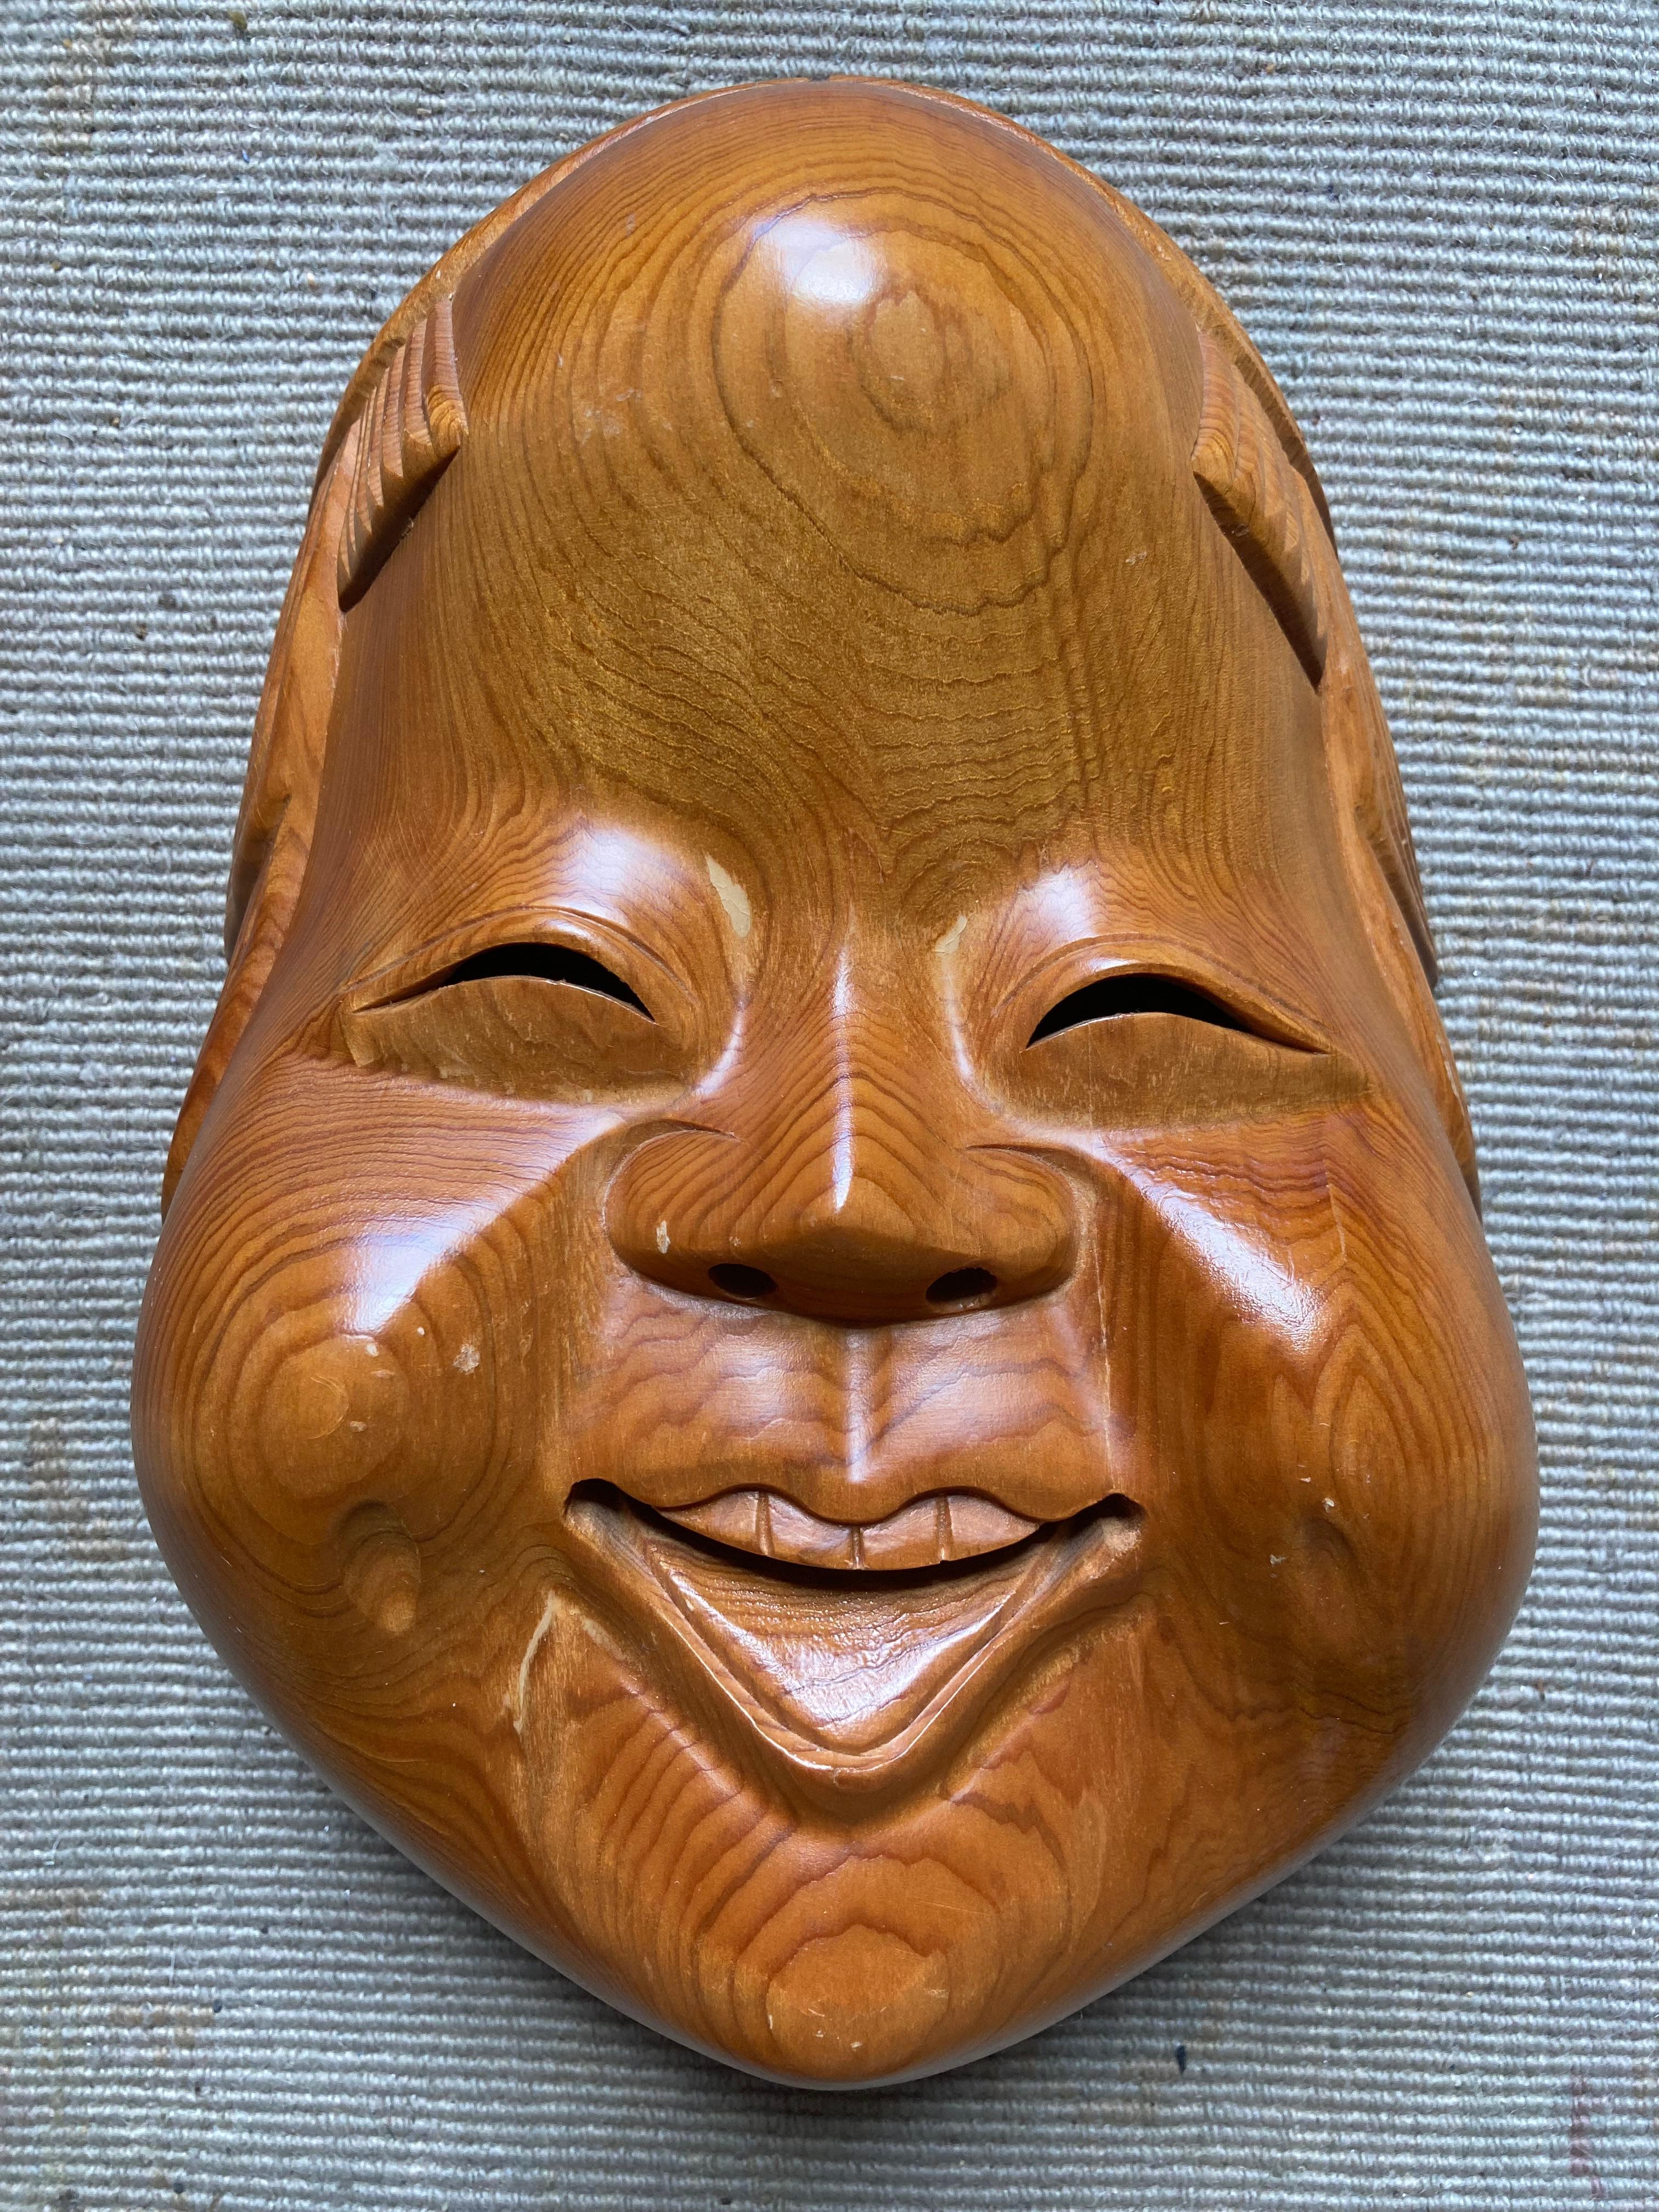 A collection of five hand-made Japanese Noh drama masks, four of them hand-carved wood, and one (the largest, the one that's black and red on one half and white on the other) of papier mache. Largest is 15